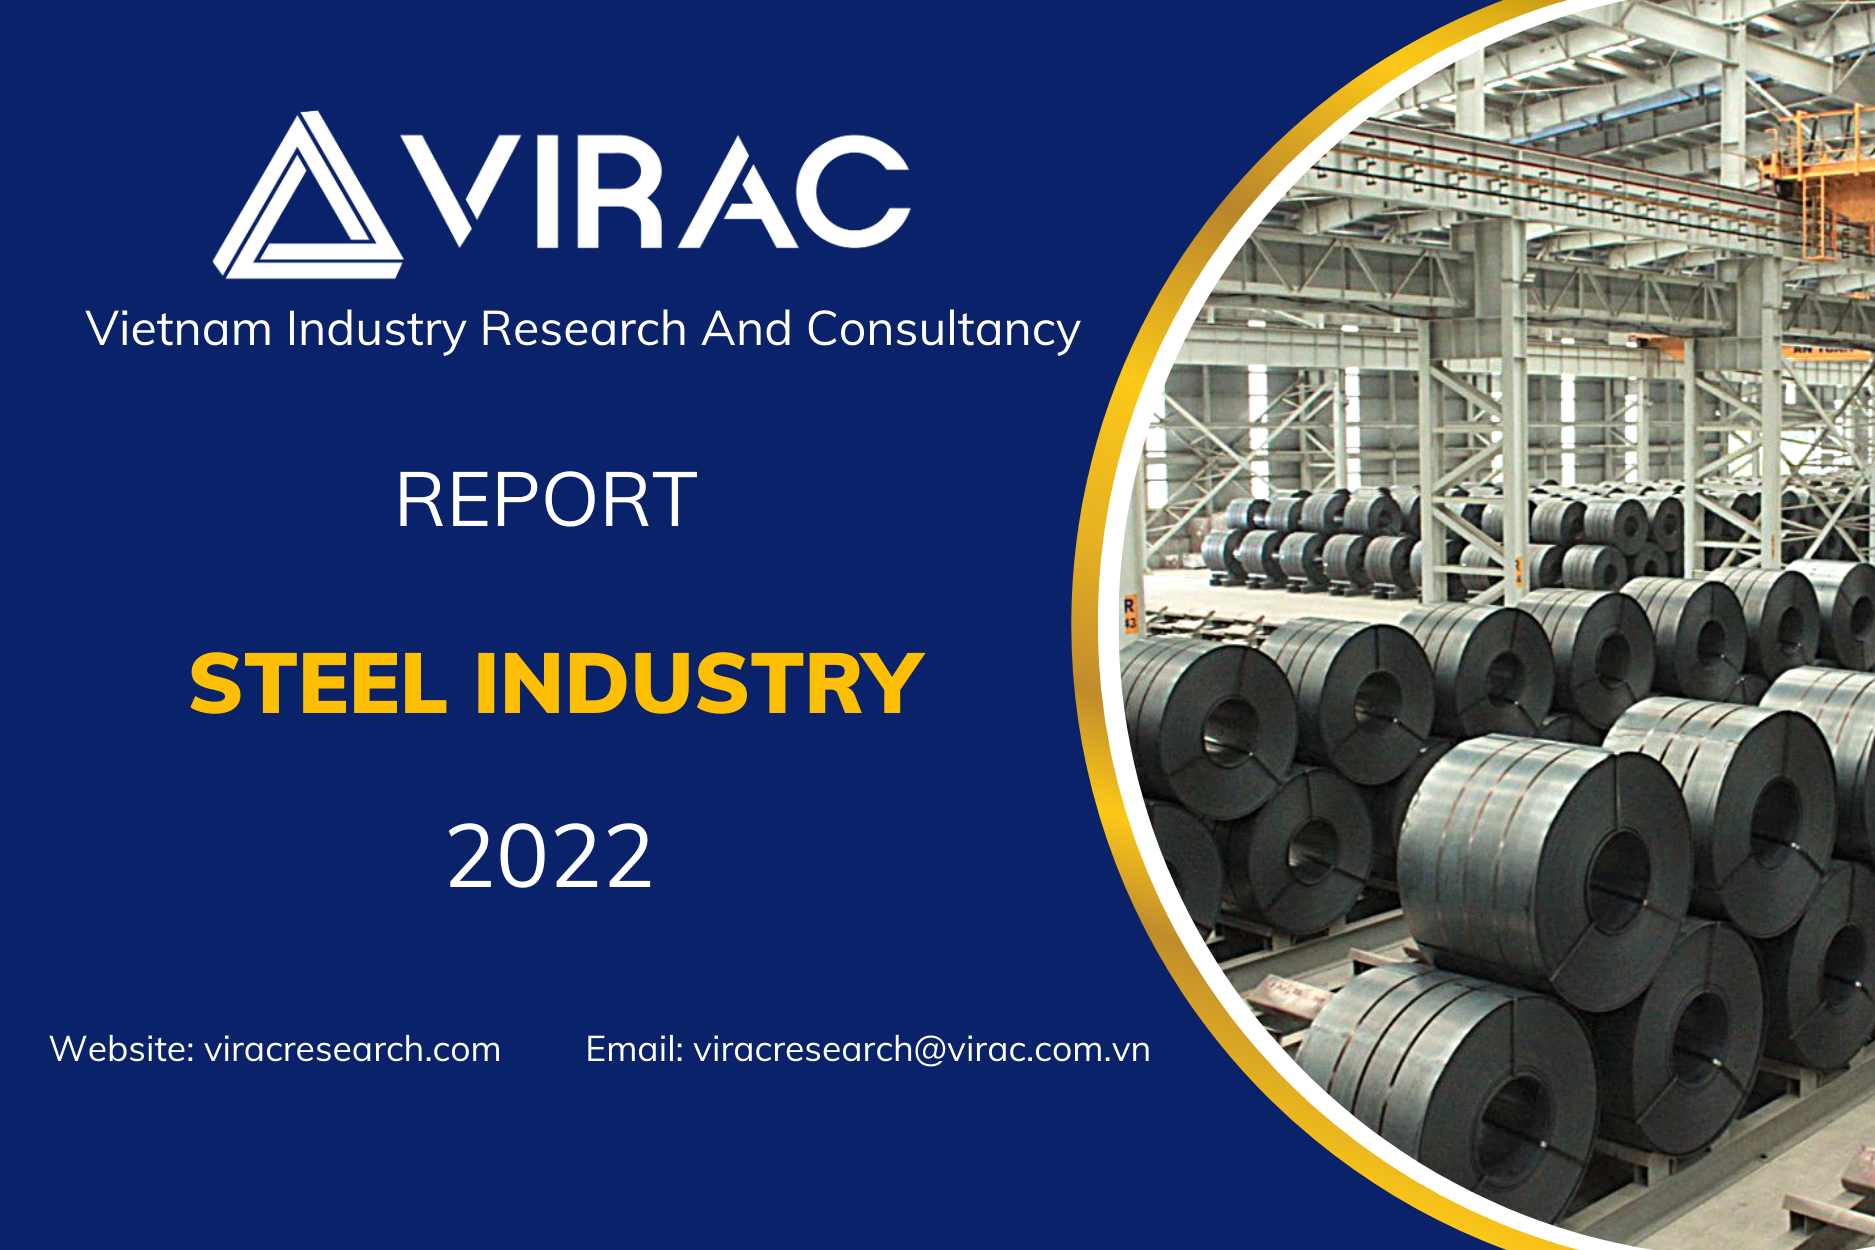 Steel annual report in 2022